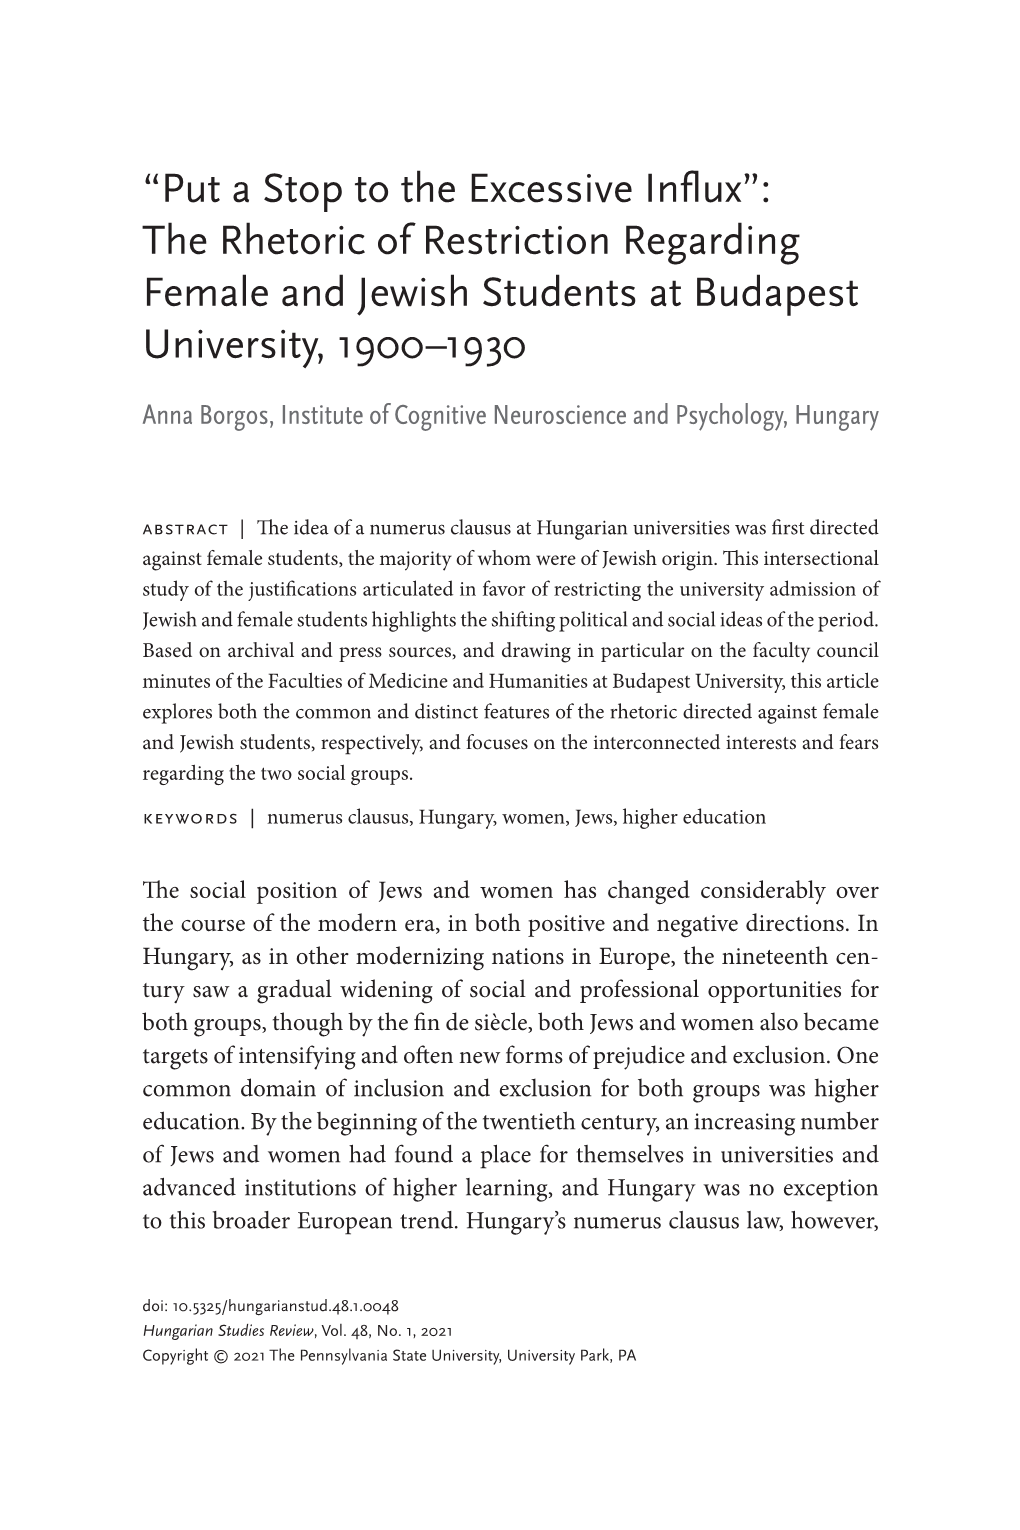 The Rhetoric of Restriction Regarding Female and Jewish Students At